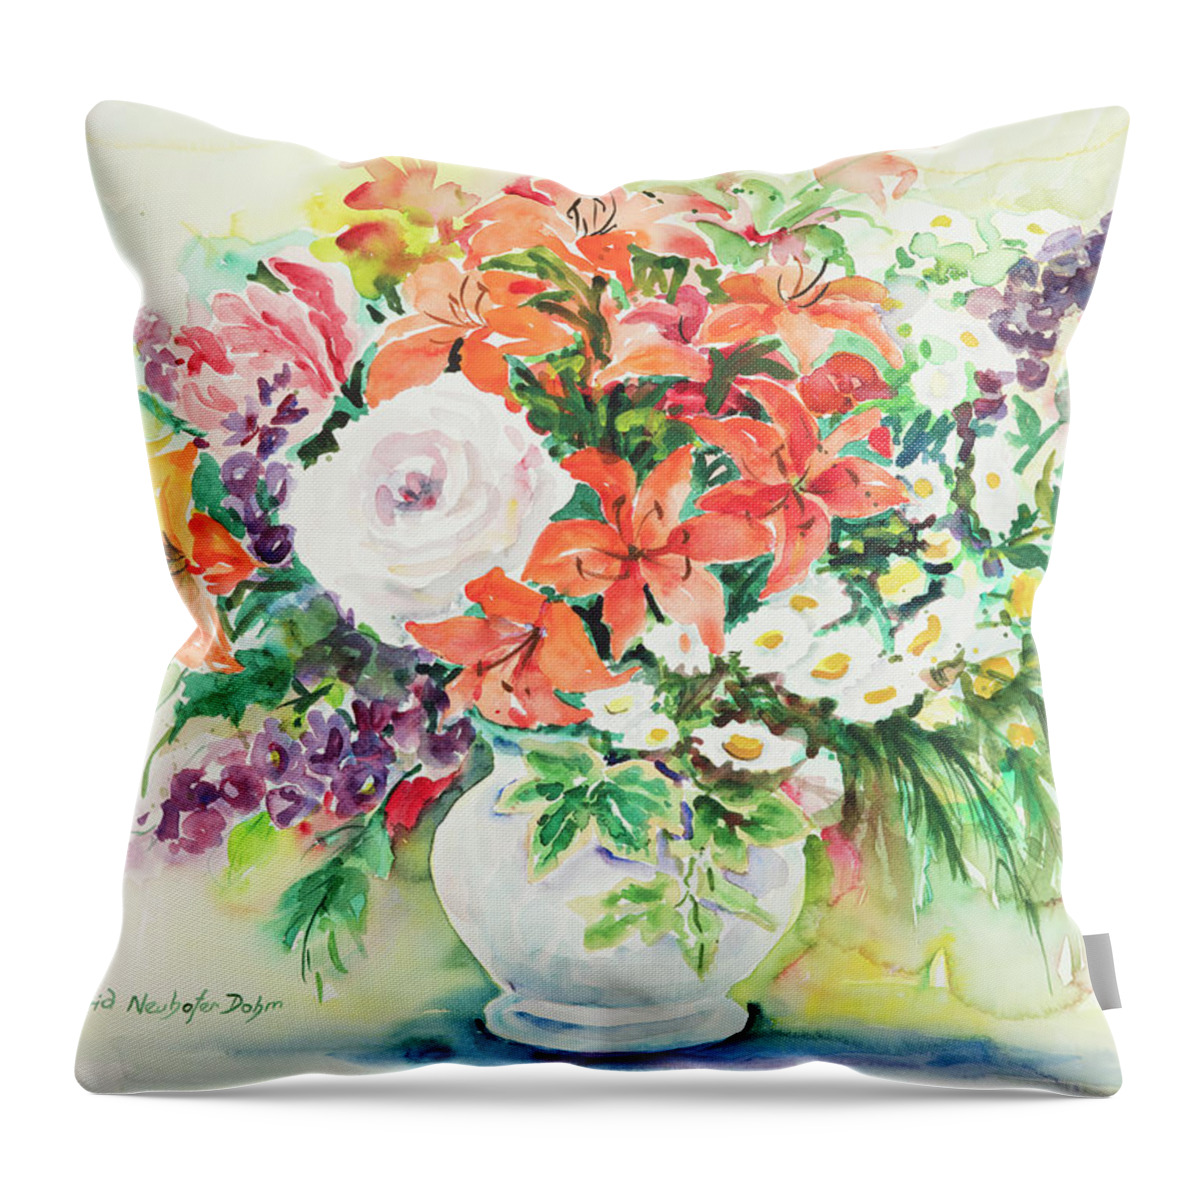 Flowers Throw Pillow featuring the painting Watercolor Series 165 by Ingrid Dohm